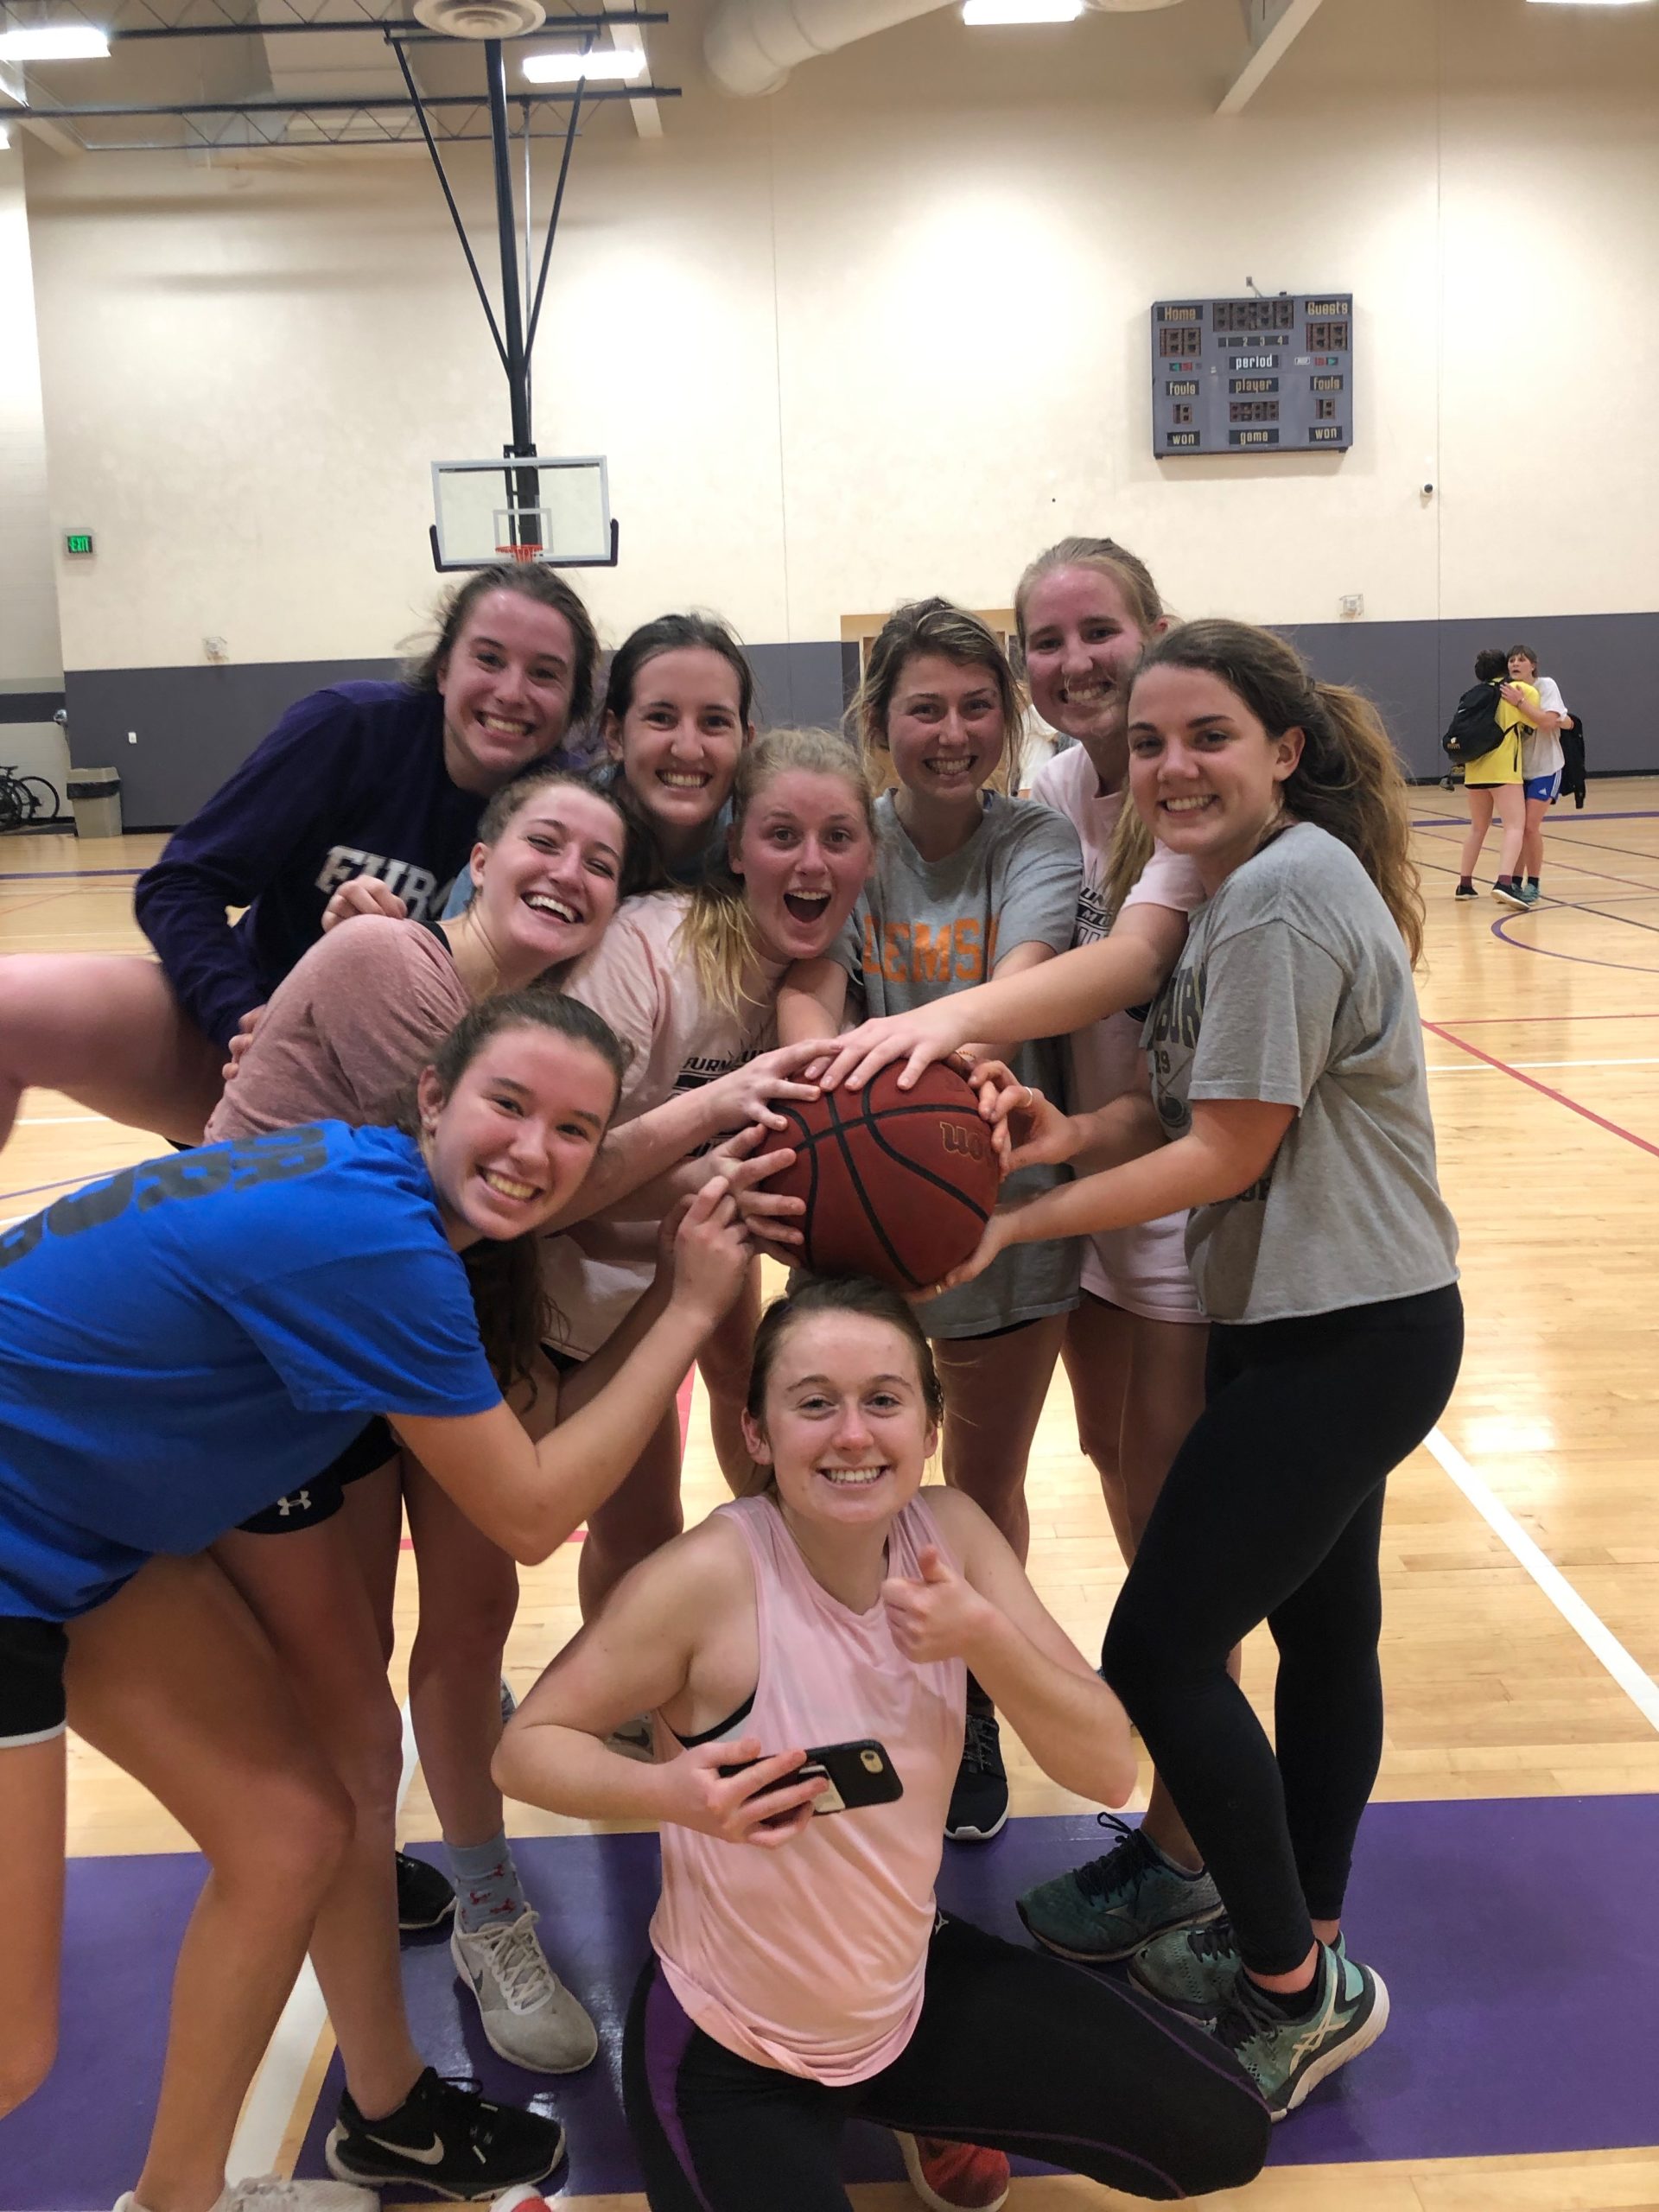 Students smiling in group shot, holding basketball